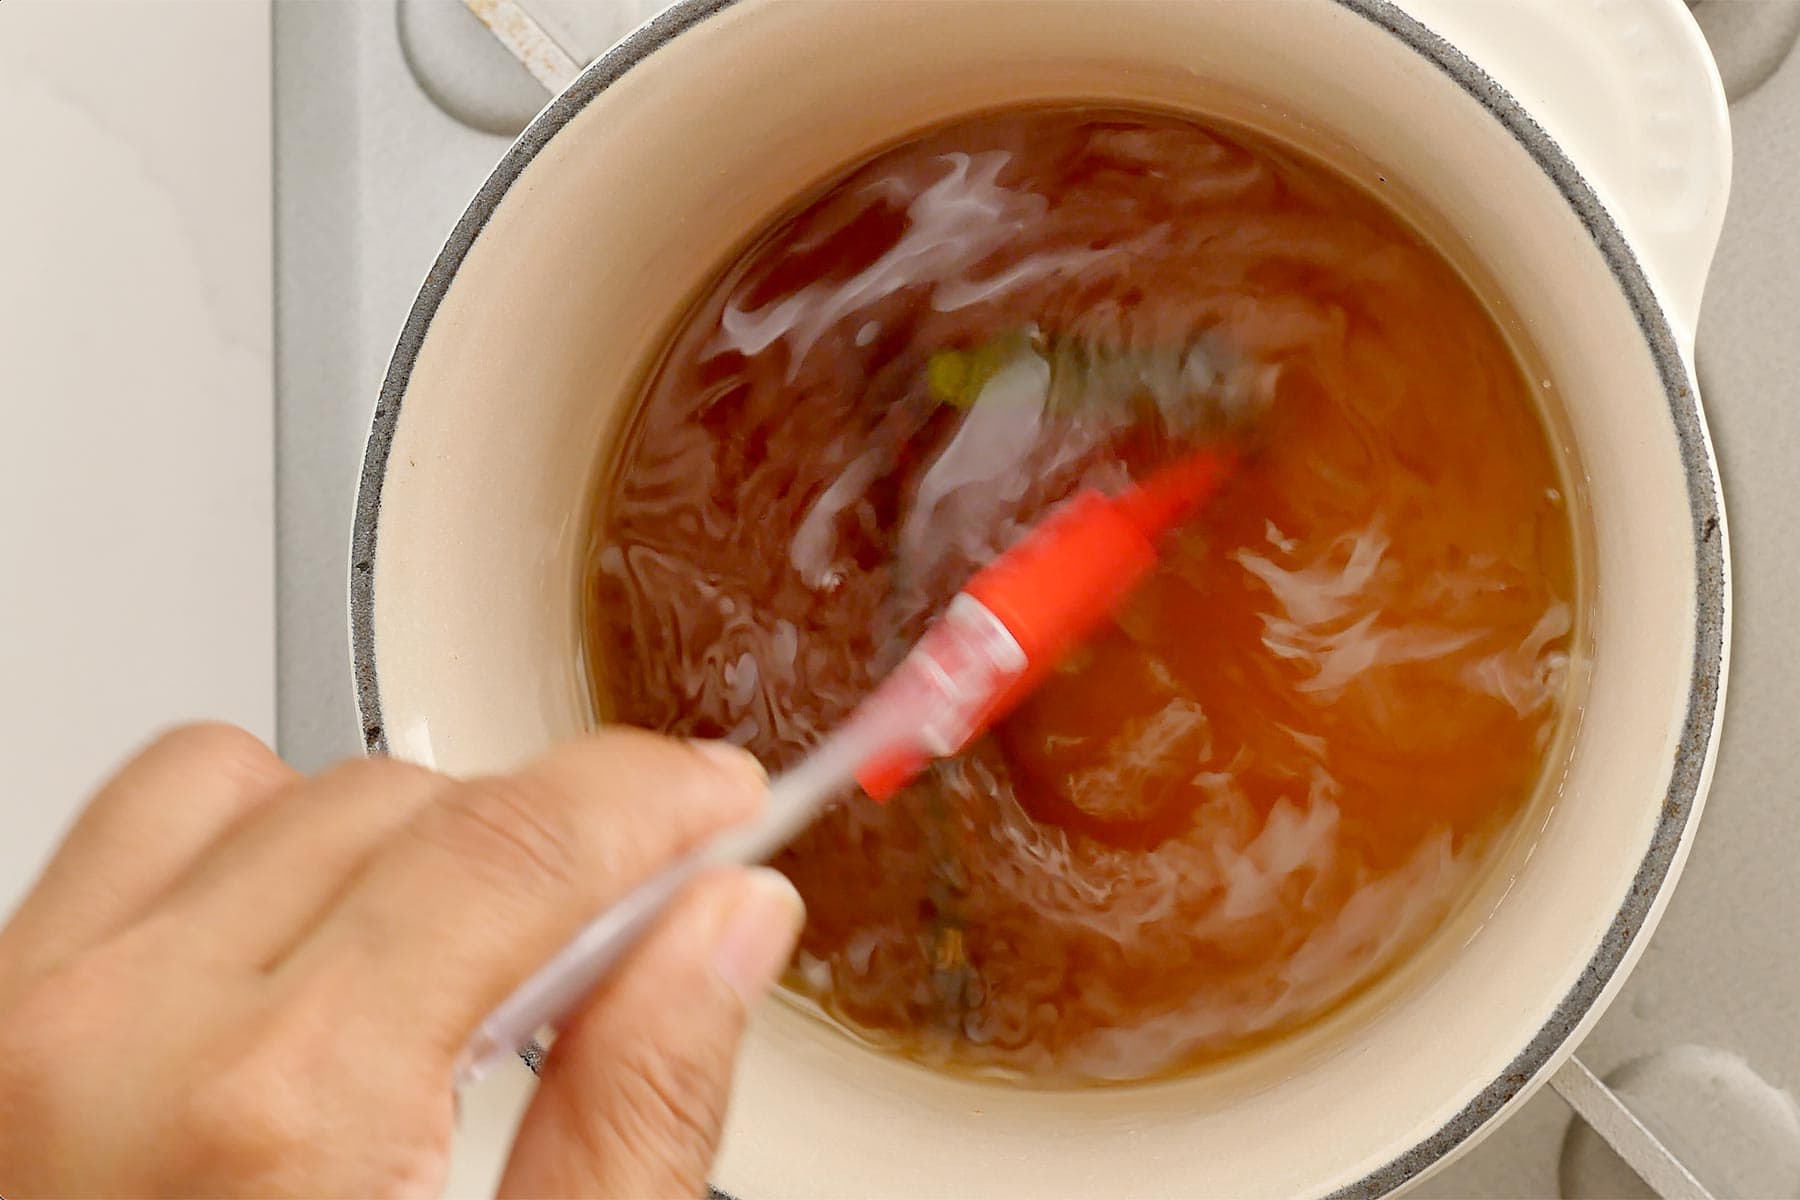 Stirring syrup in the pot